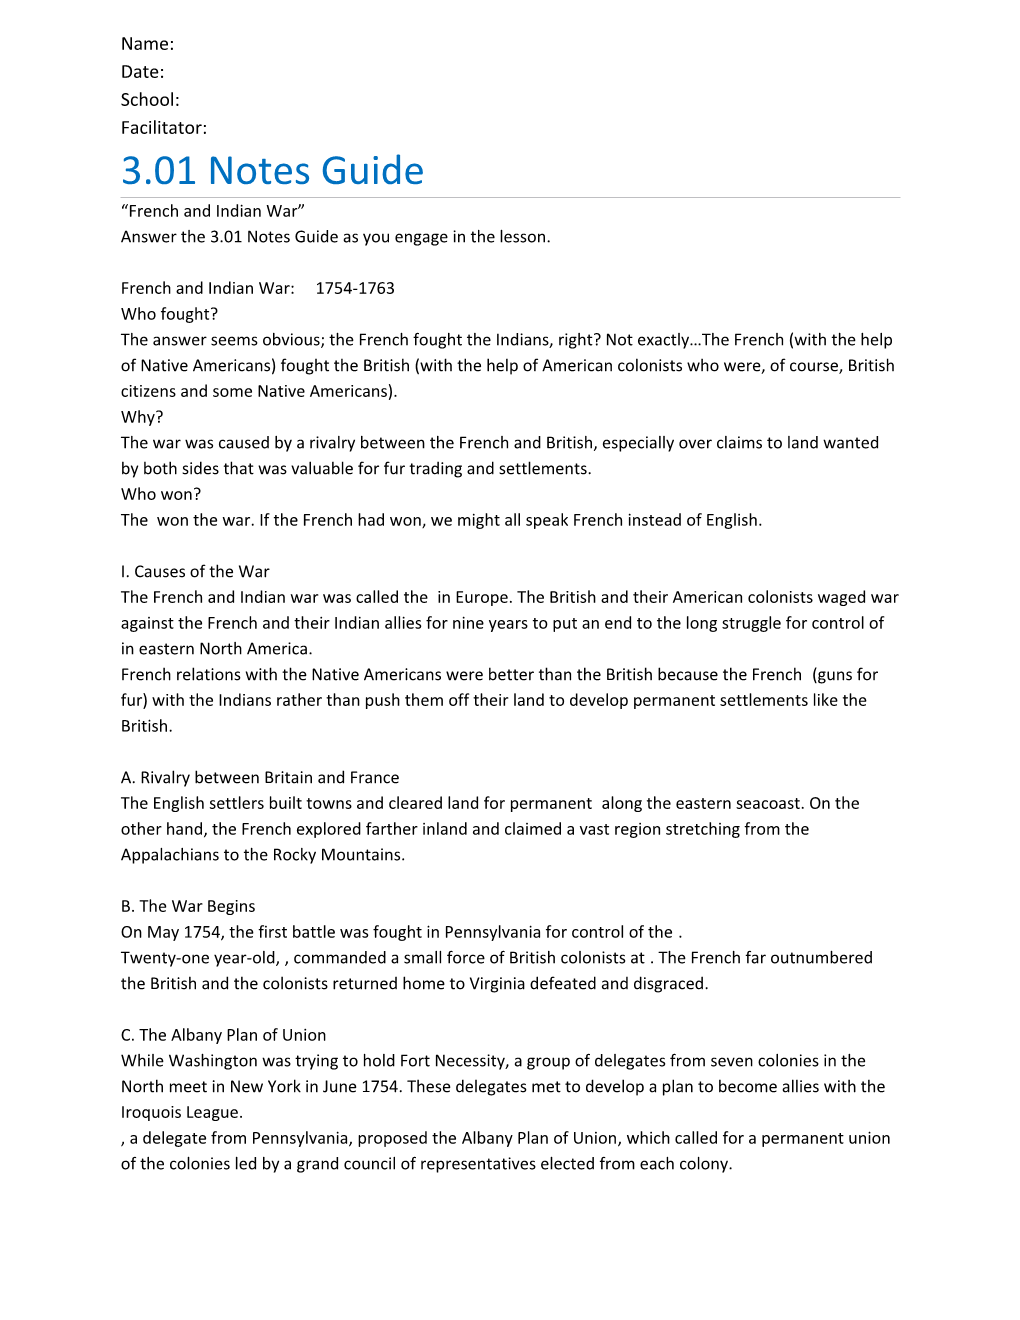 Answer the 3.01 Notes Guide As You Engage in the Lesson